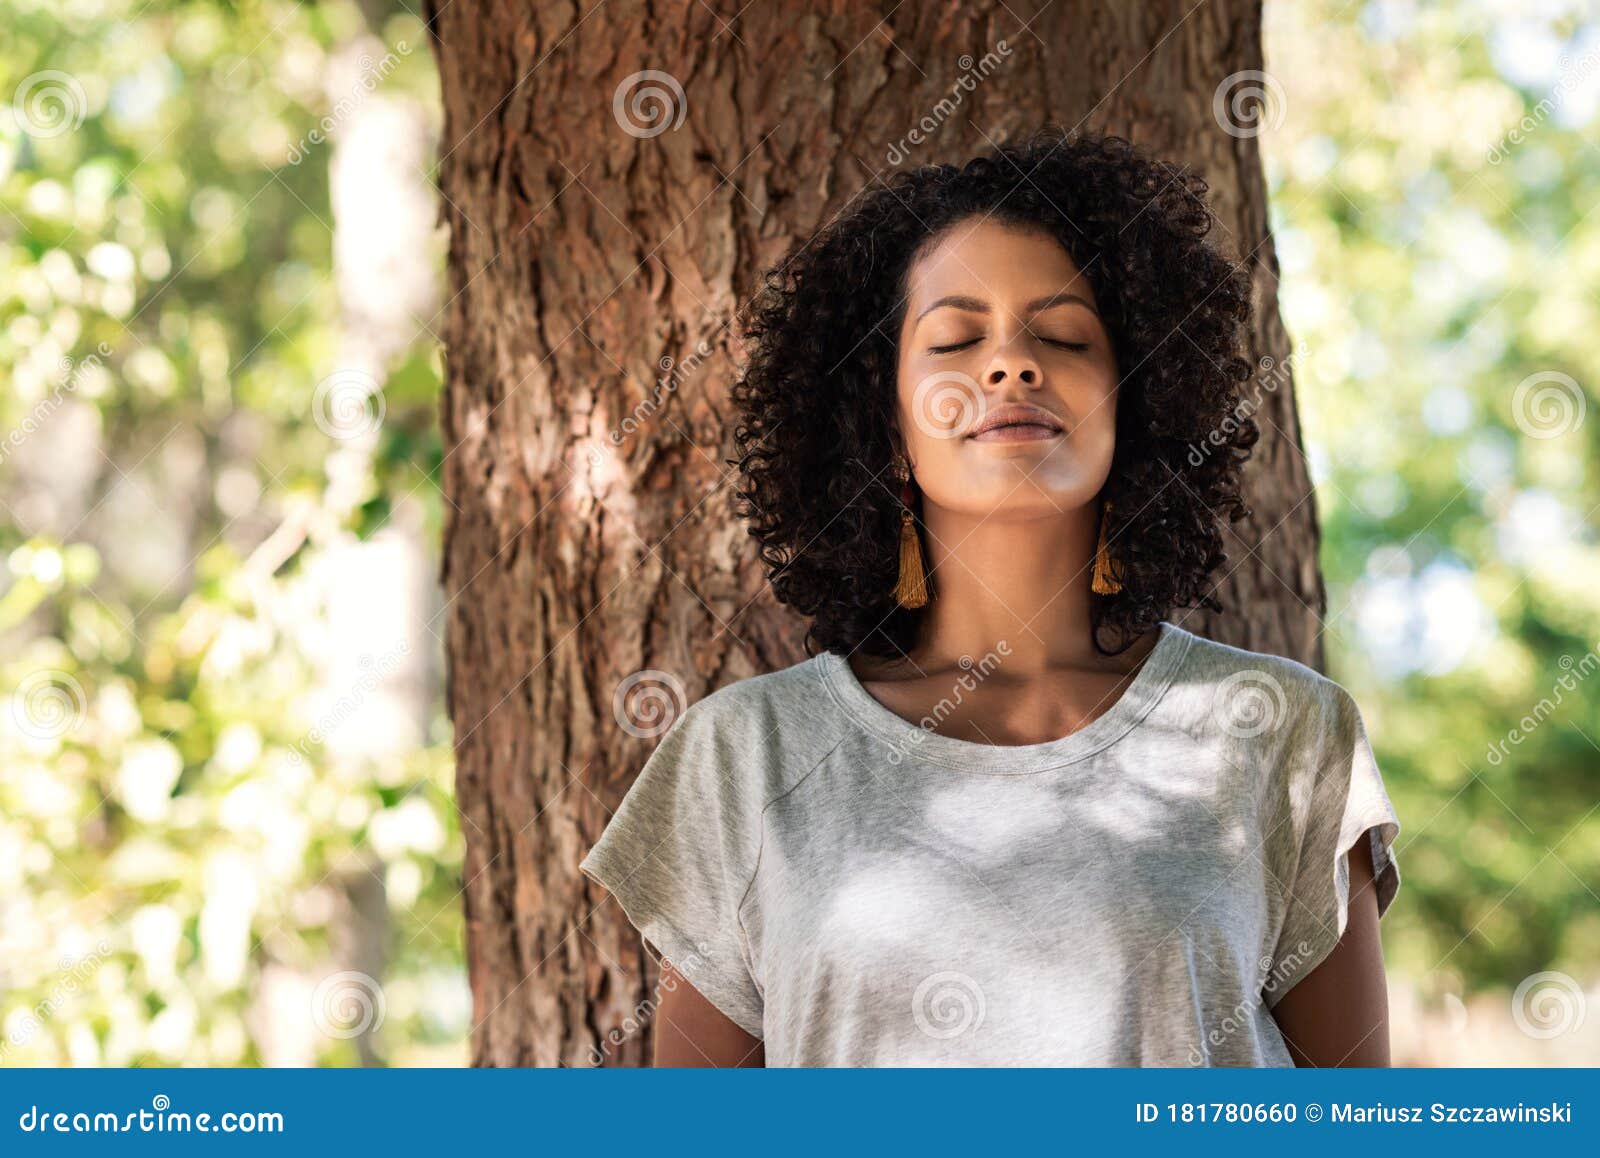 peaceful woman leaning against a tree with her eyes closed